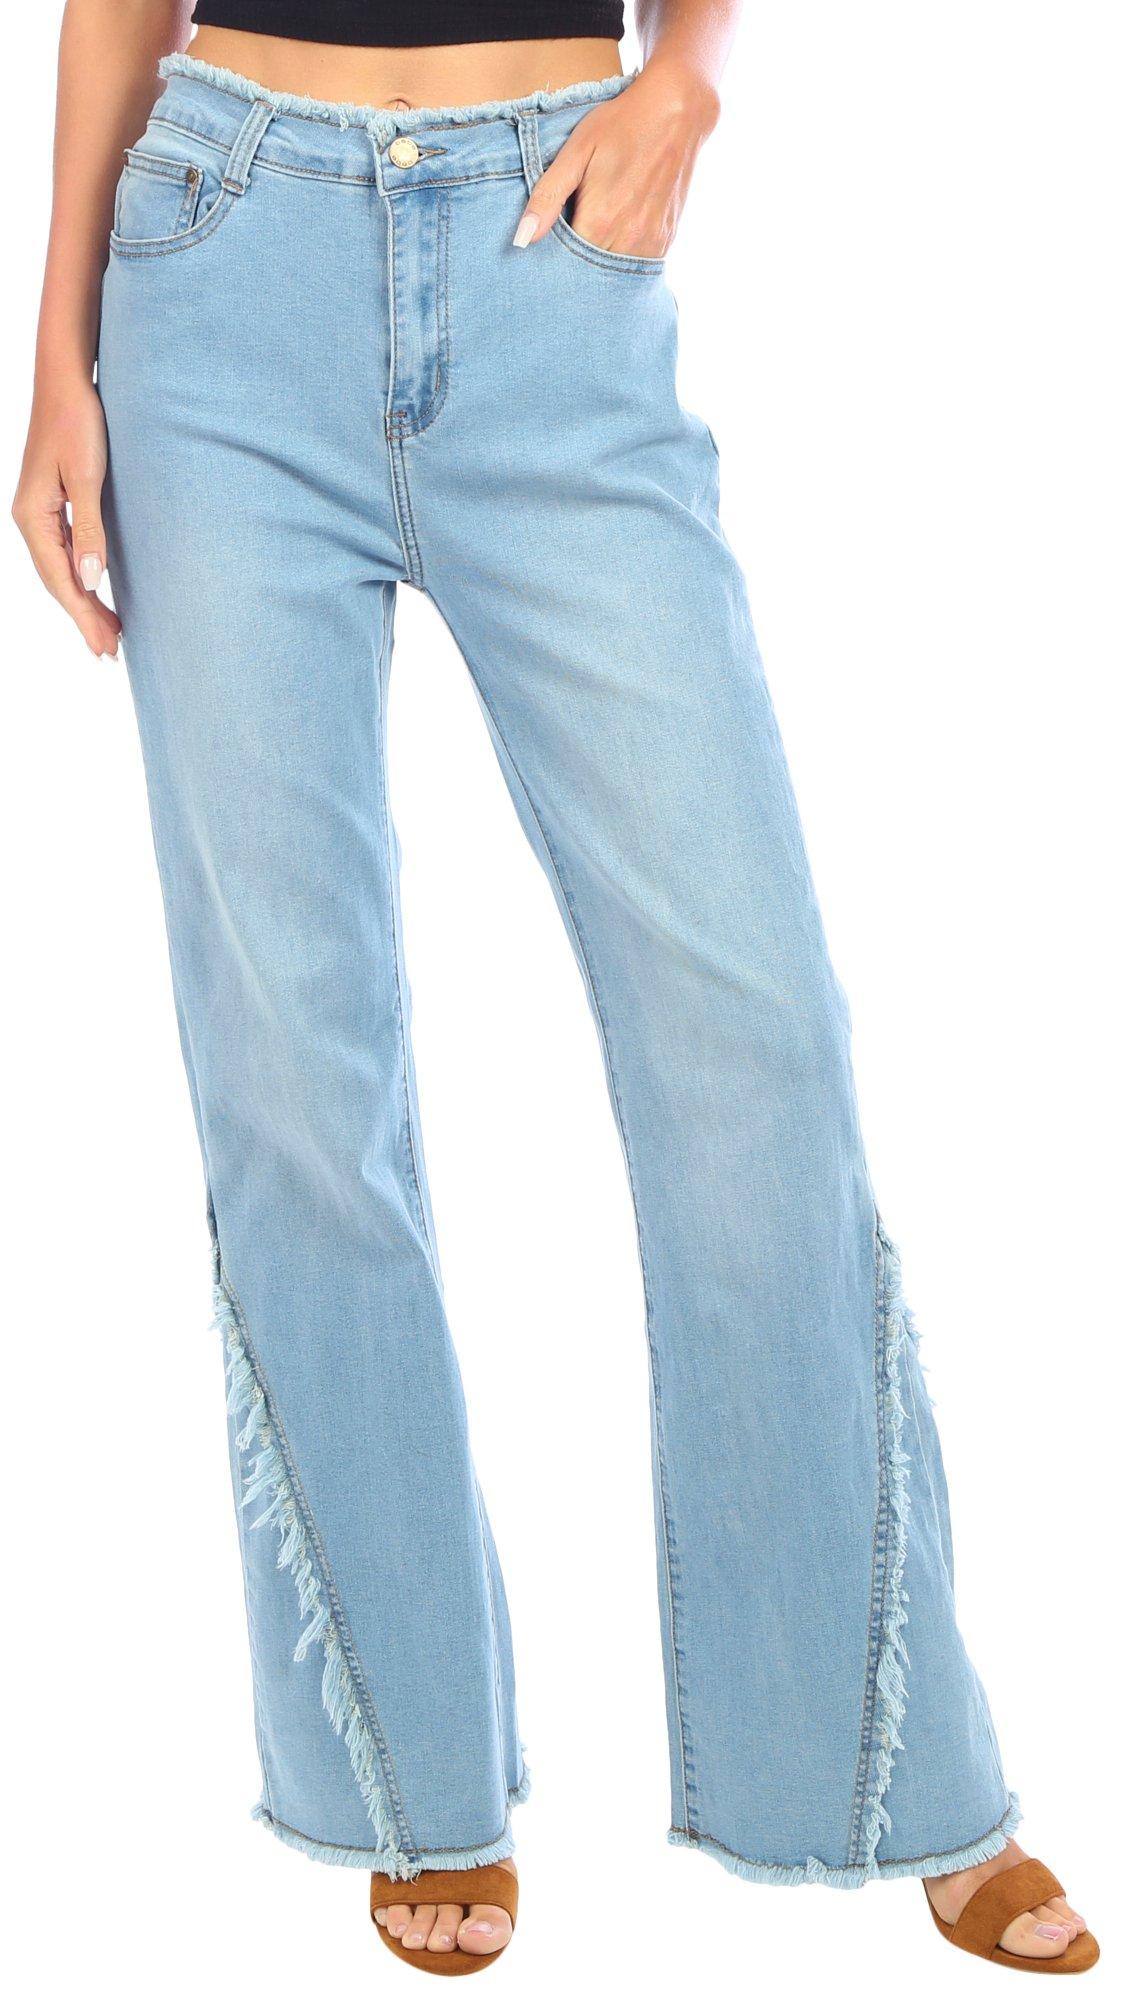 Juniors Distressed Flared Jeans